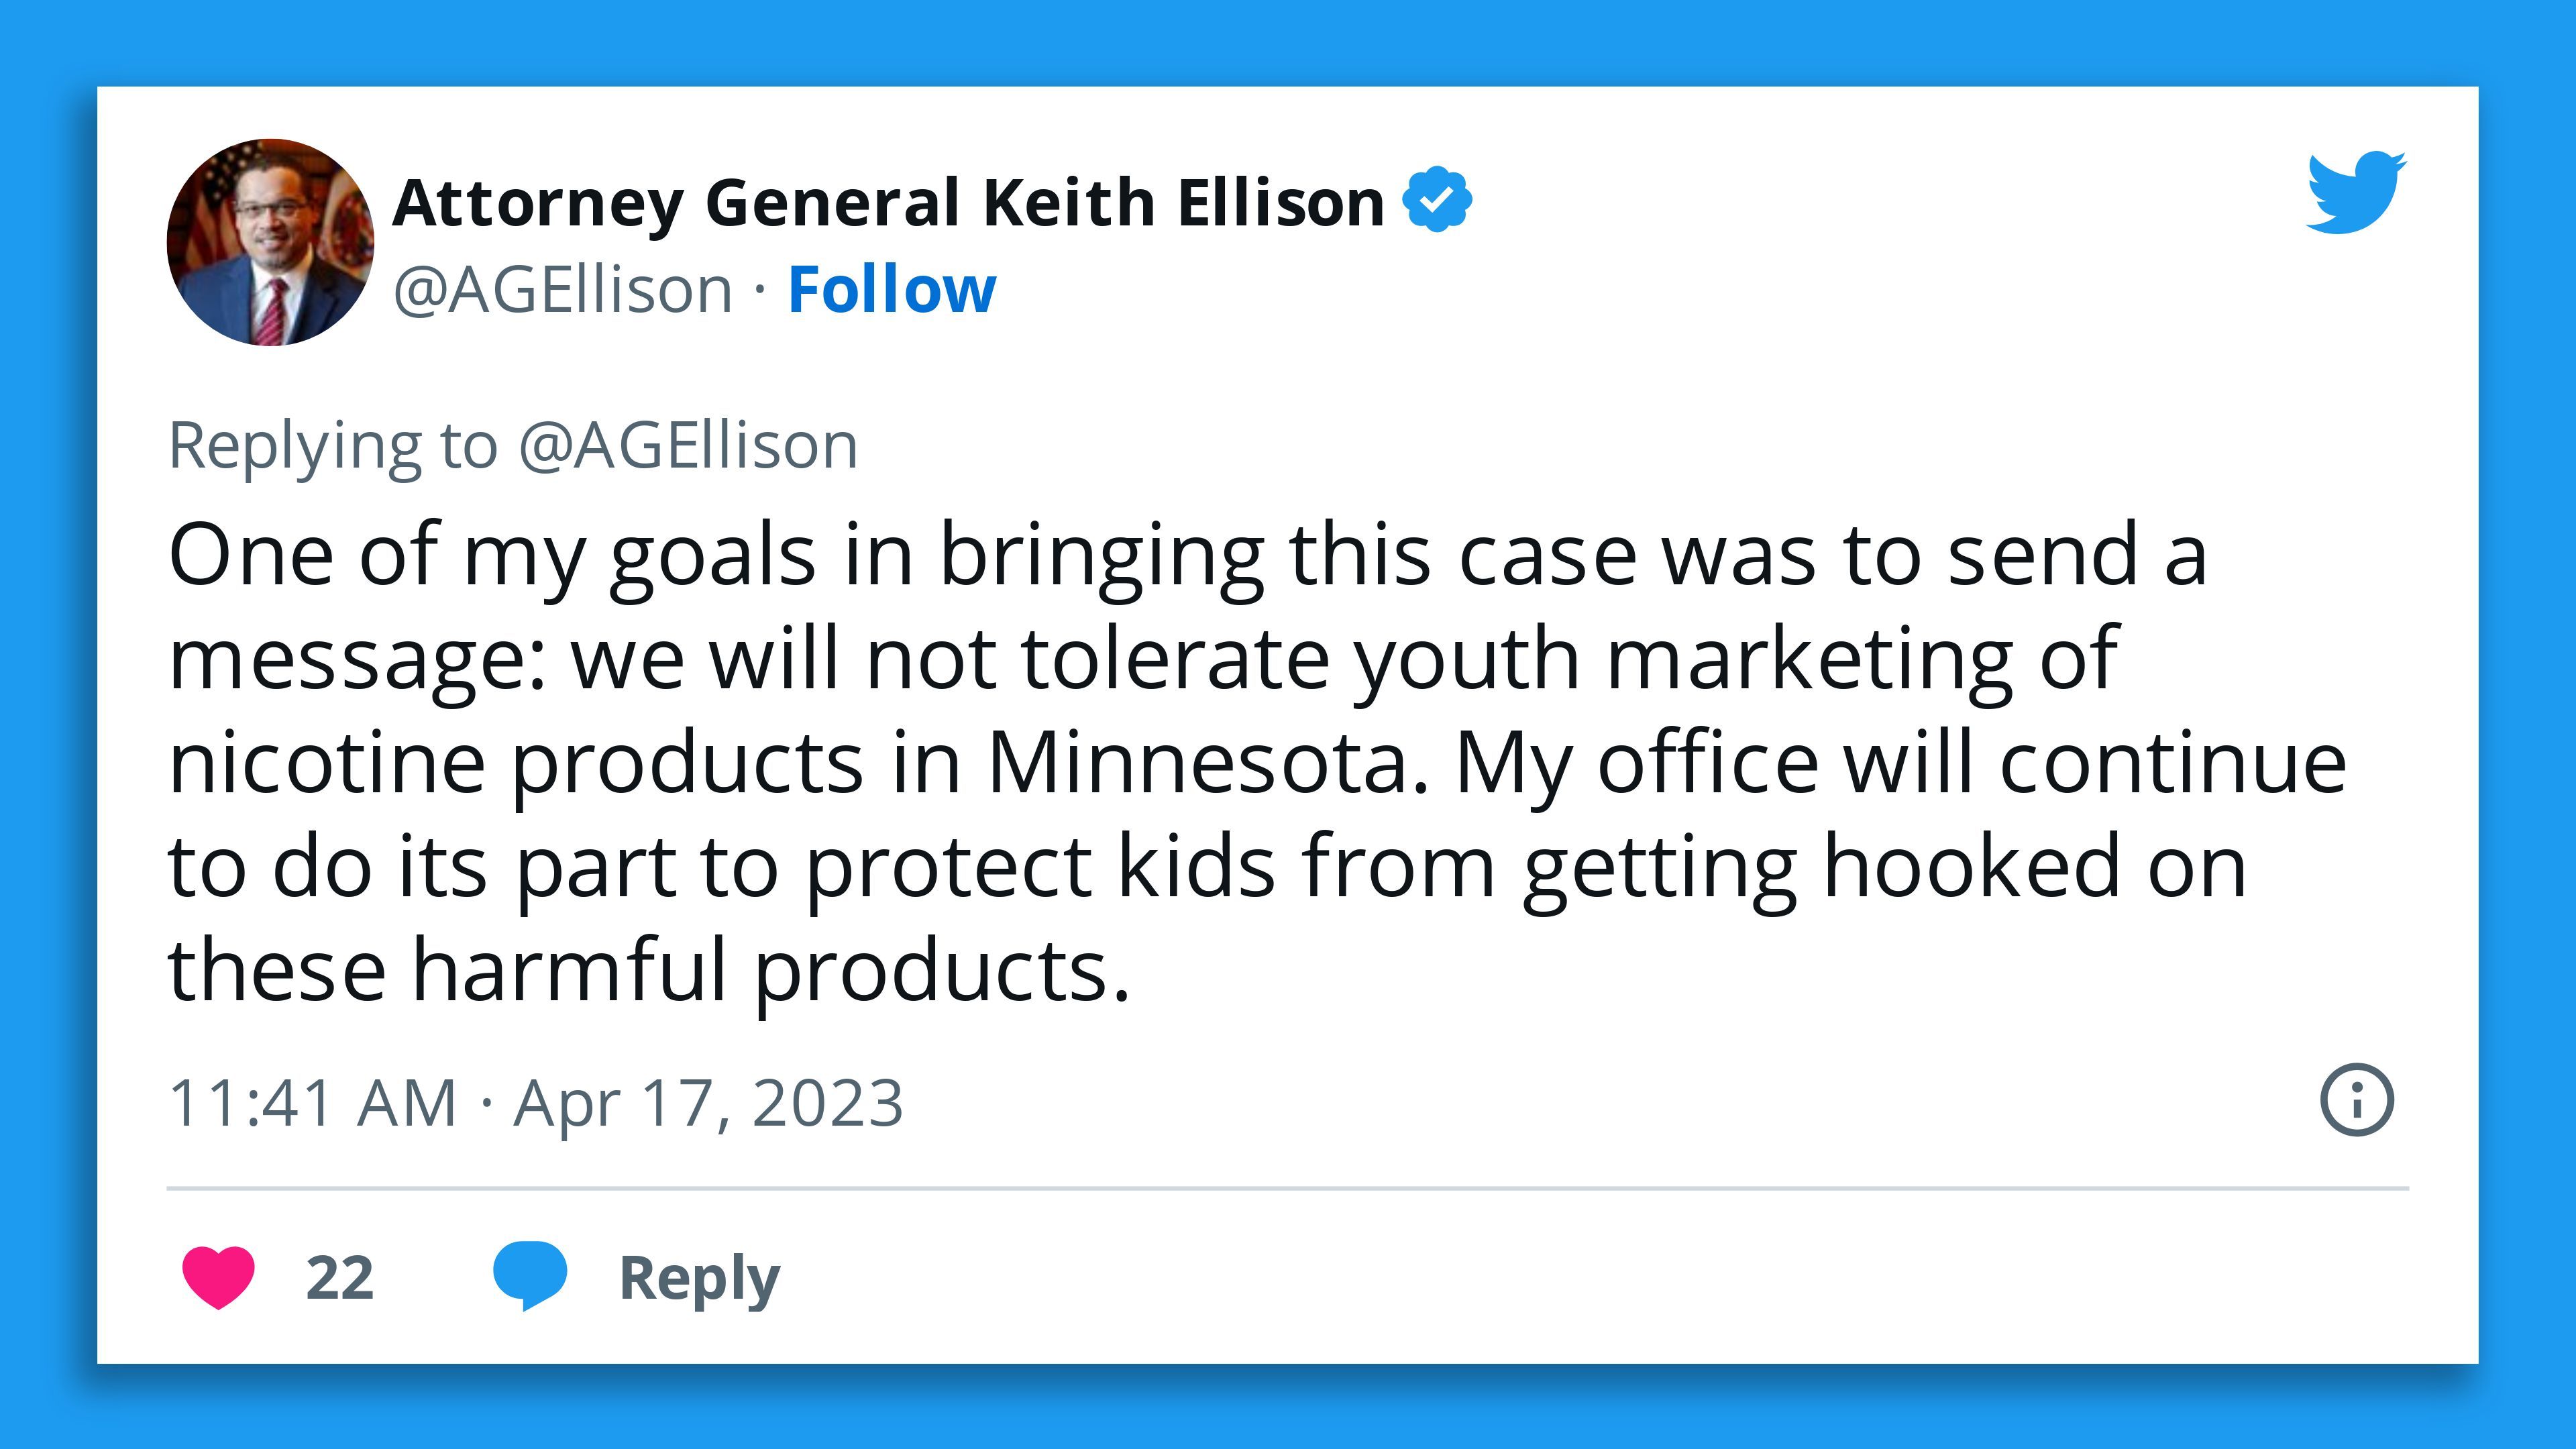 A screenshot of a tweet by Minnesota Attorney General Keith Ellison stating, "One of my goals in bringing this case was to send a message: we will not tolerate youth marketing of nicotine products in Minnesota. My office will continue to do its part to protect kids from getting hooked on these harmful products."